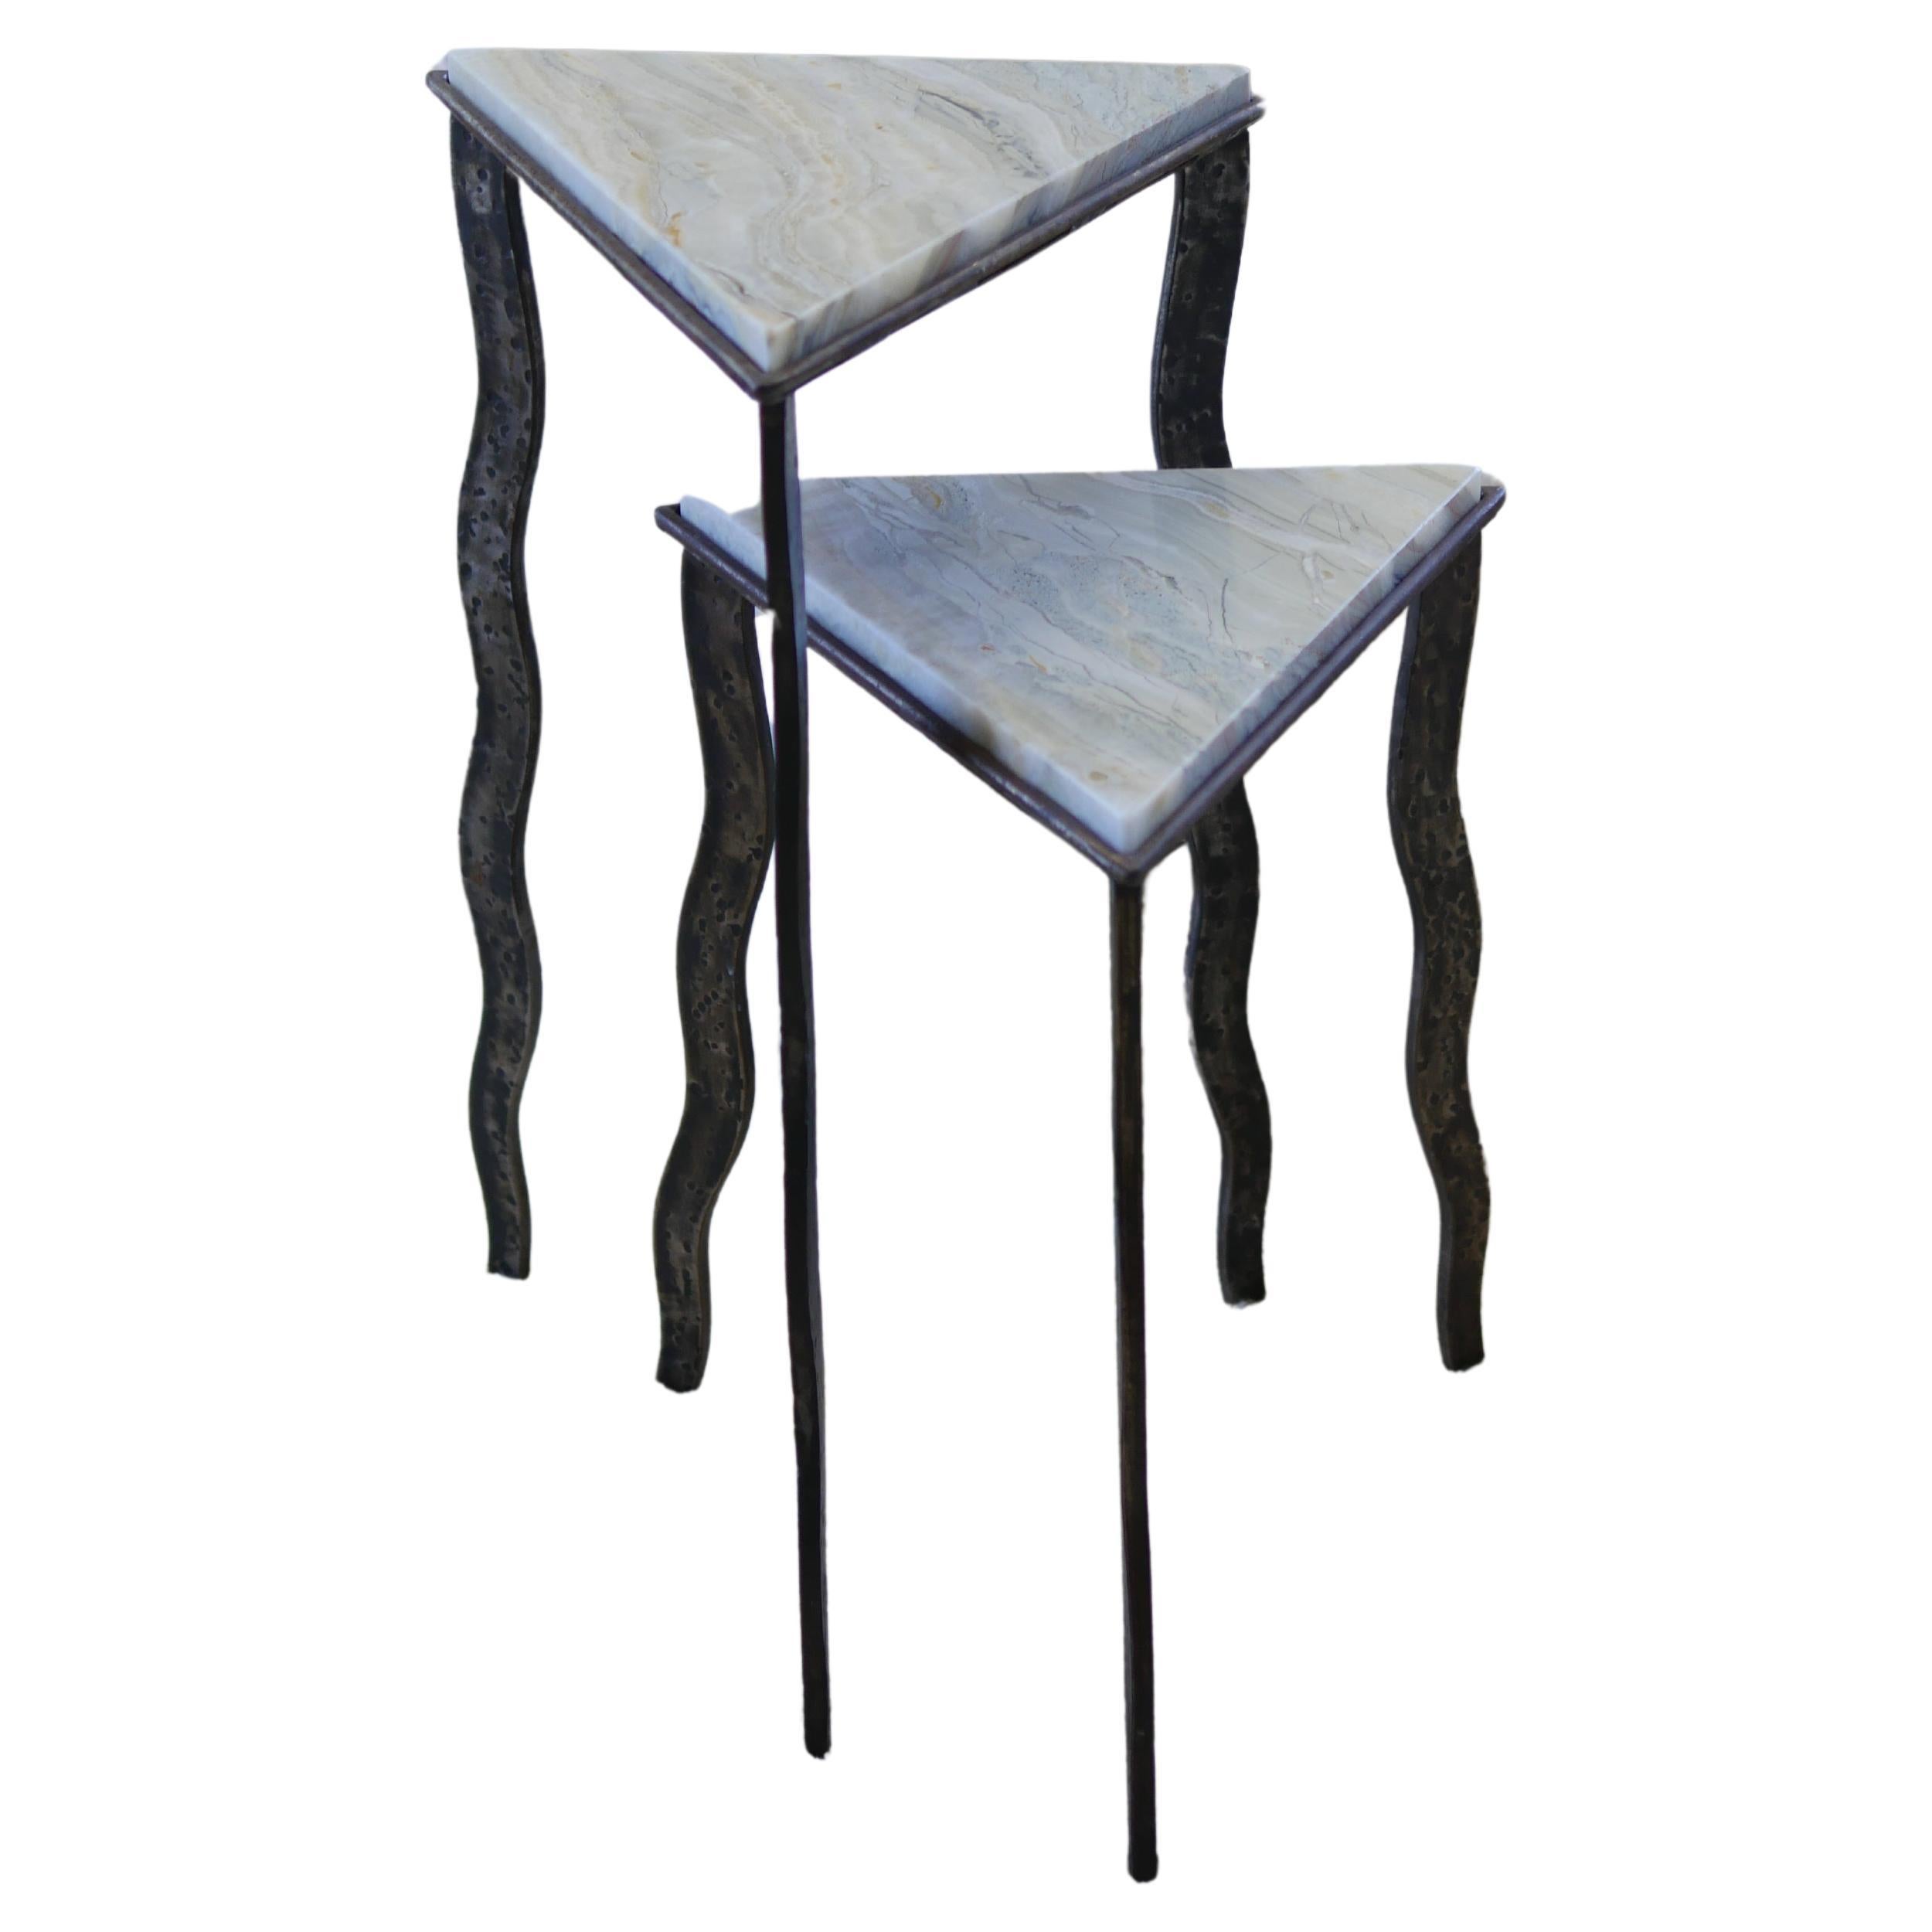 1980s Onyx and Iron Postmodern Artisan Side Tables - Set of 2